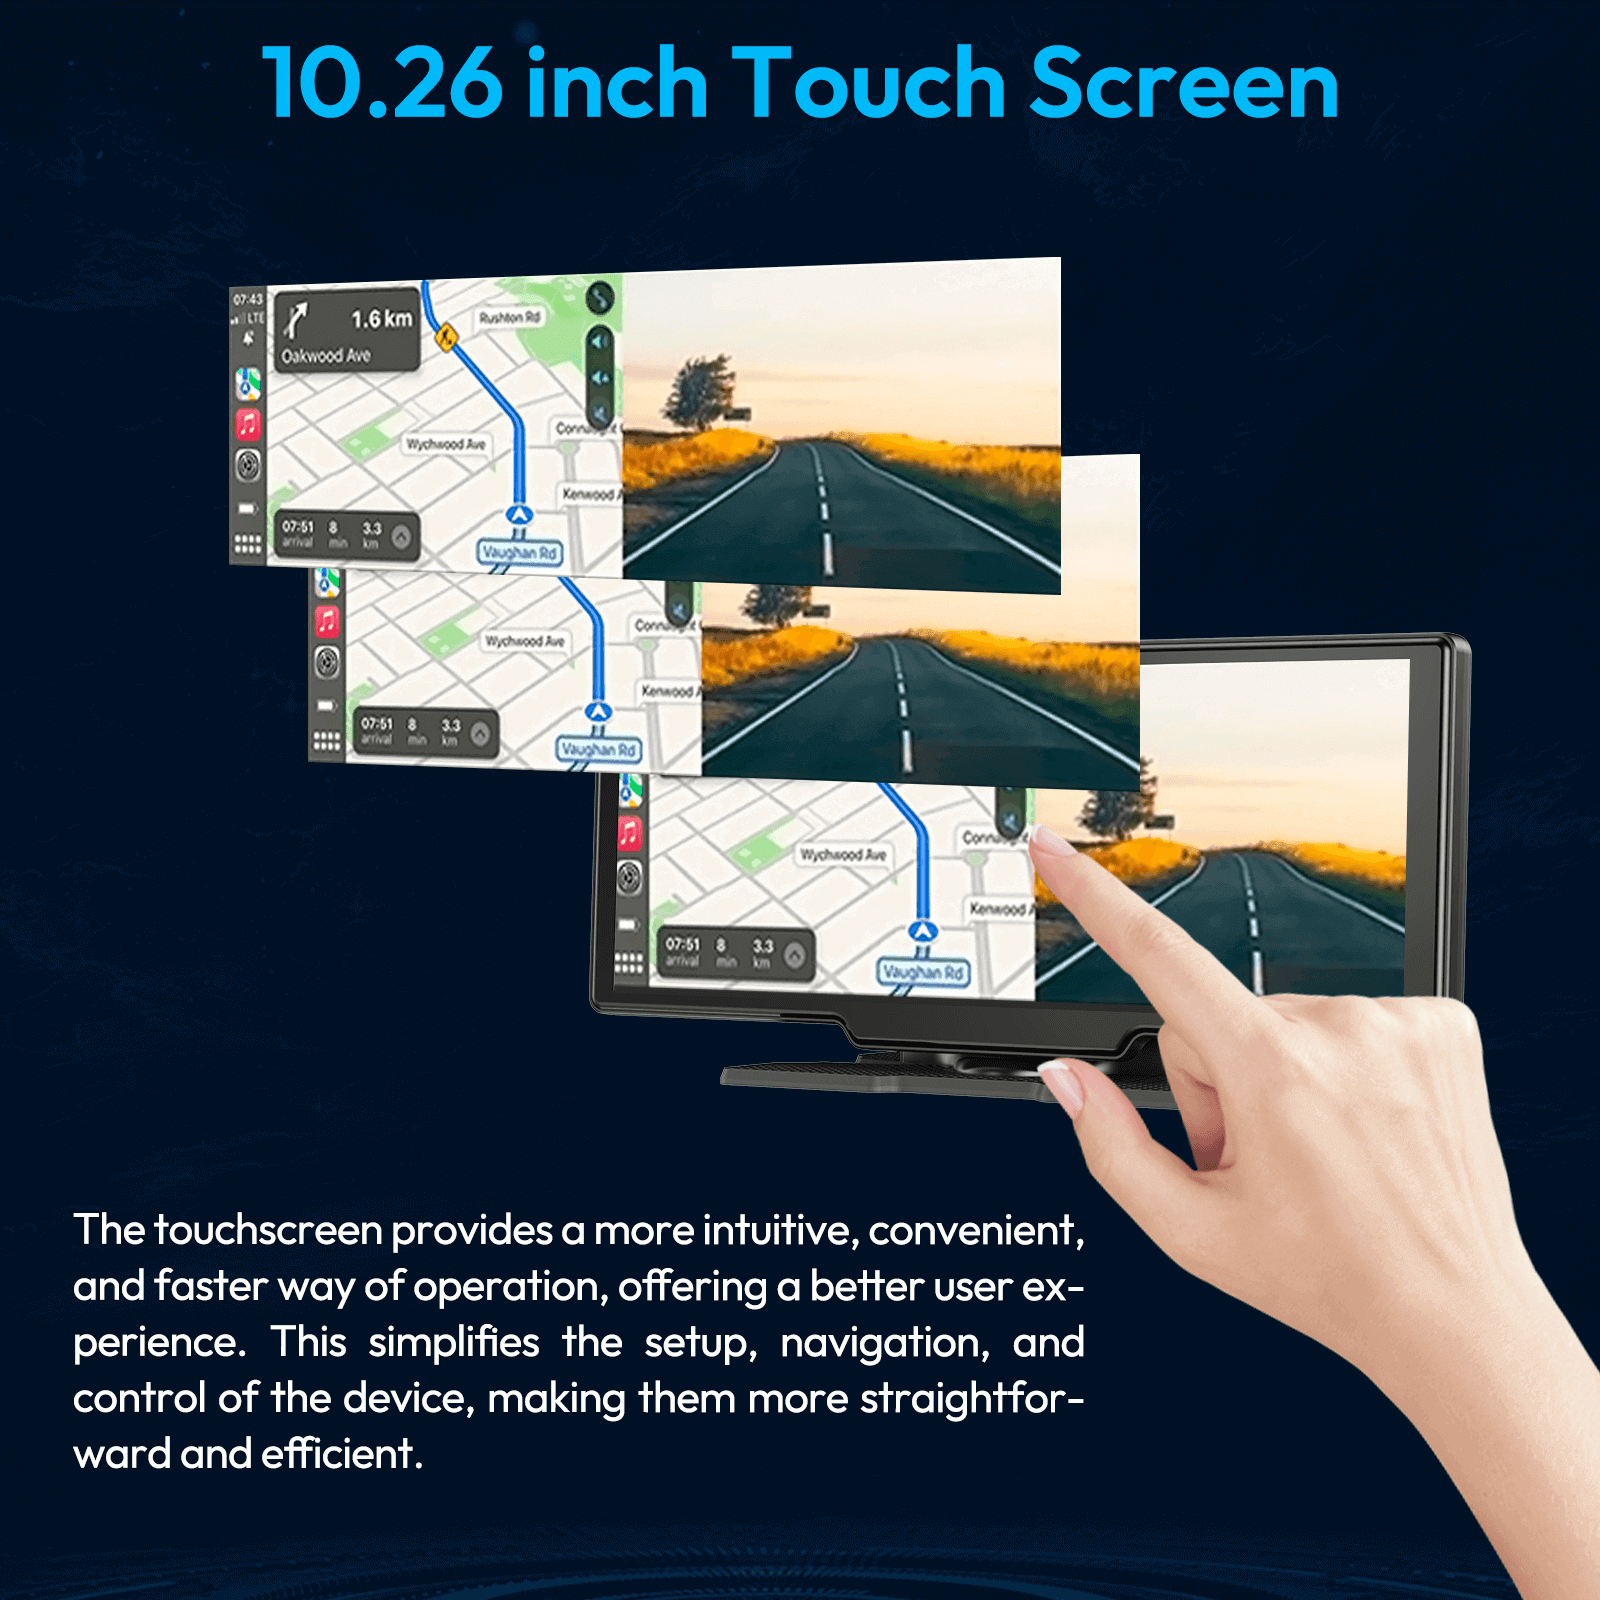 Cost-effective and Most worthwhile XGODY H30 Dash Cam | 10.26" Screen, 4K Camera, Carplay/Android Auto Support - XGODY 